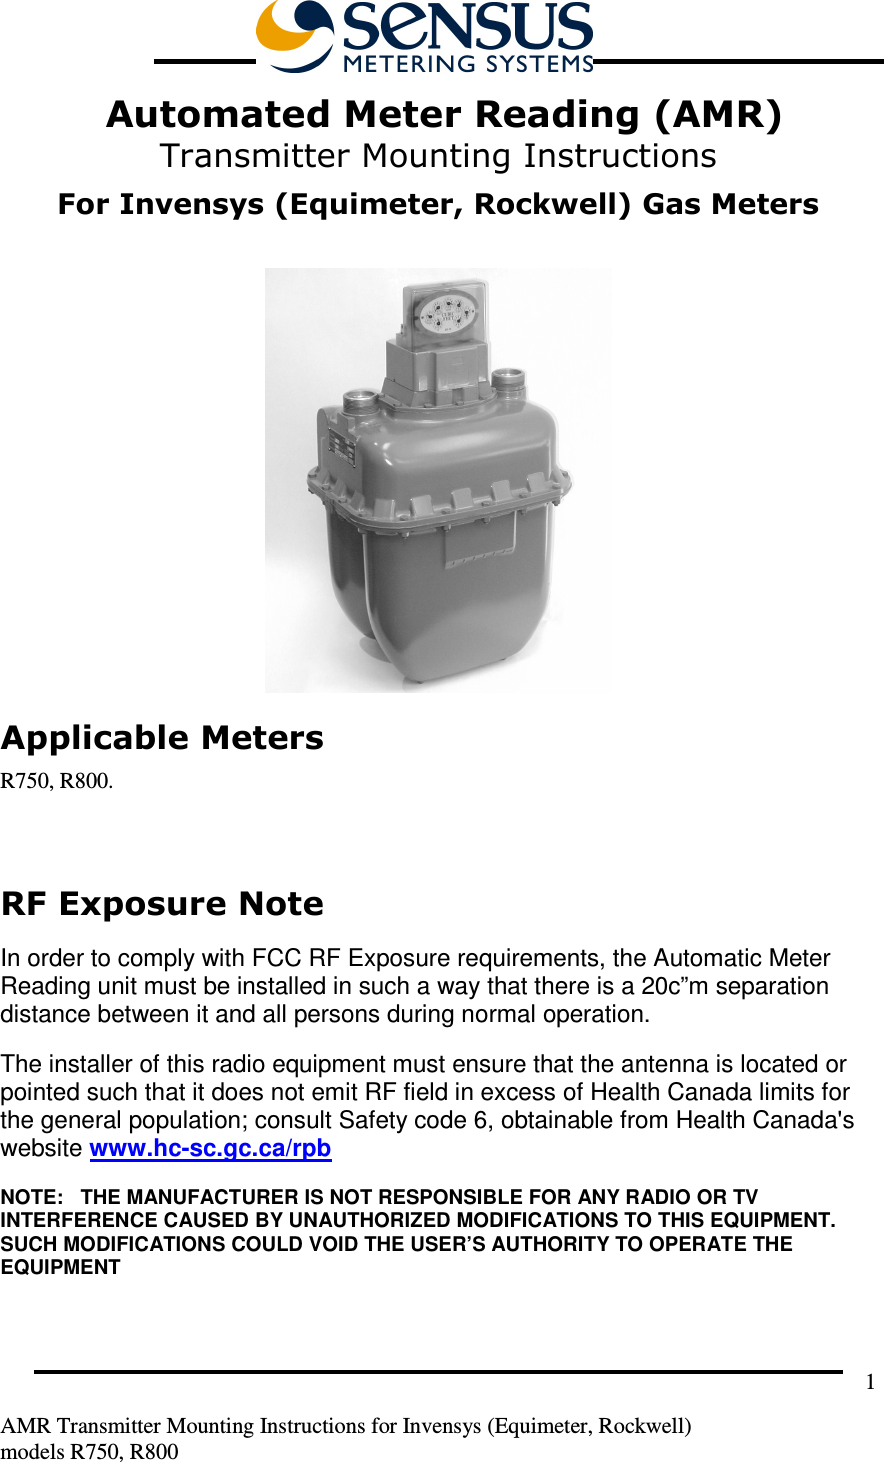         AMR Transmitter Mounting Instructions for Invensys (Equimeter, Rockwell) models R750, R800 1  Automated Meter Reading (AMR) Transmitter Mounting Instructions  For Invensys (Equimeter, Rockwell) Gas Meters   Applicable Meters R750, R800.  RF Exposure Note  In order to comply with FCC RF Exposure requirements, the Automatic Meter Reading unit must be installed in such a way that there is a 20c”m separation distance between it and all persons during normal operation. The installer of this radio equipment must ensure that the antenna is located or pointed such that it does not emit RF field in excess of Health Canada limits for the general population; consult Safety code 6, obtainable from Health Canada&apos;s website www.hc-sc.gc.ca/rpb NOTE:   THE MANUFACTURER IS NOT RESPONSIBLE FOR ANY RADIO OR TV INTERFERENCE CAUSED BY UNAUTHORIZED MODIFICATIONS TO THIS EQUIPMENT.  SUCH MODIFICATIONS COULD VOID THE USER’S AUTHORITY TO OPERATE THE EQUIPMENT